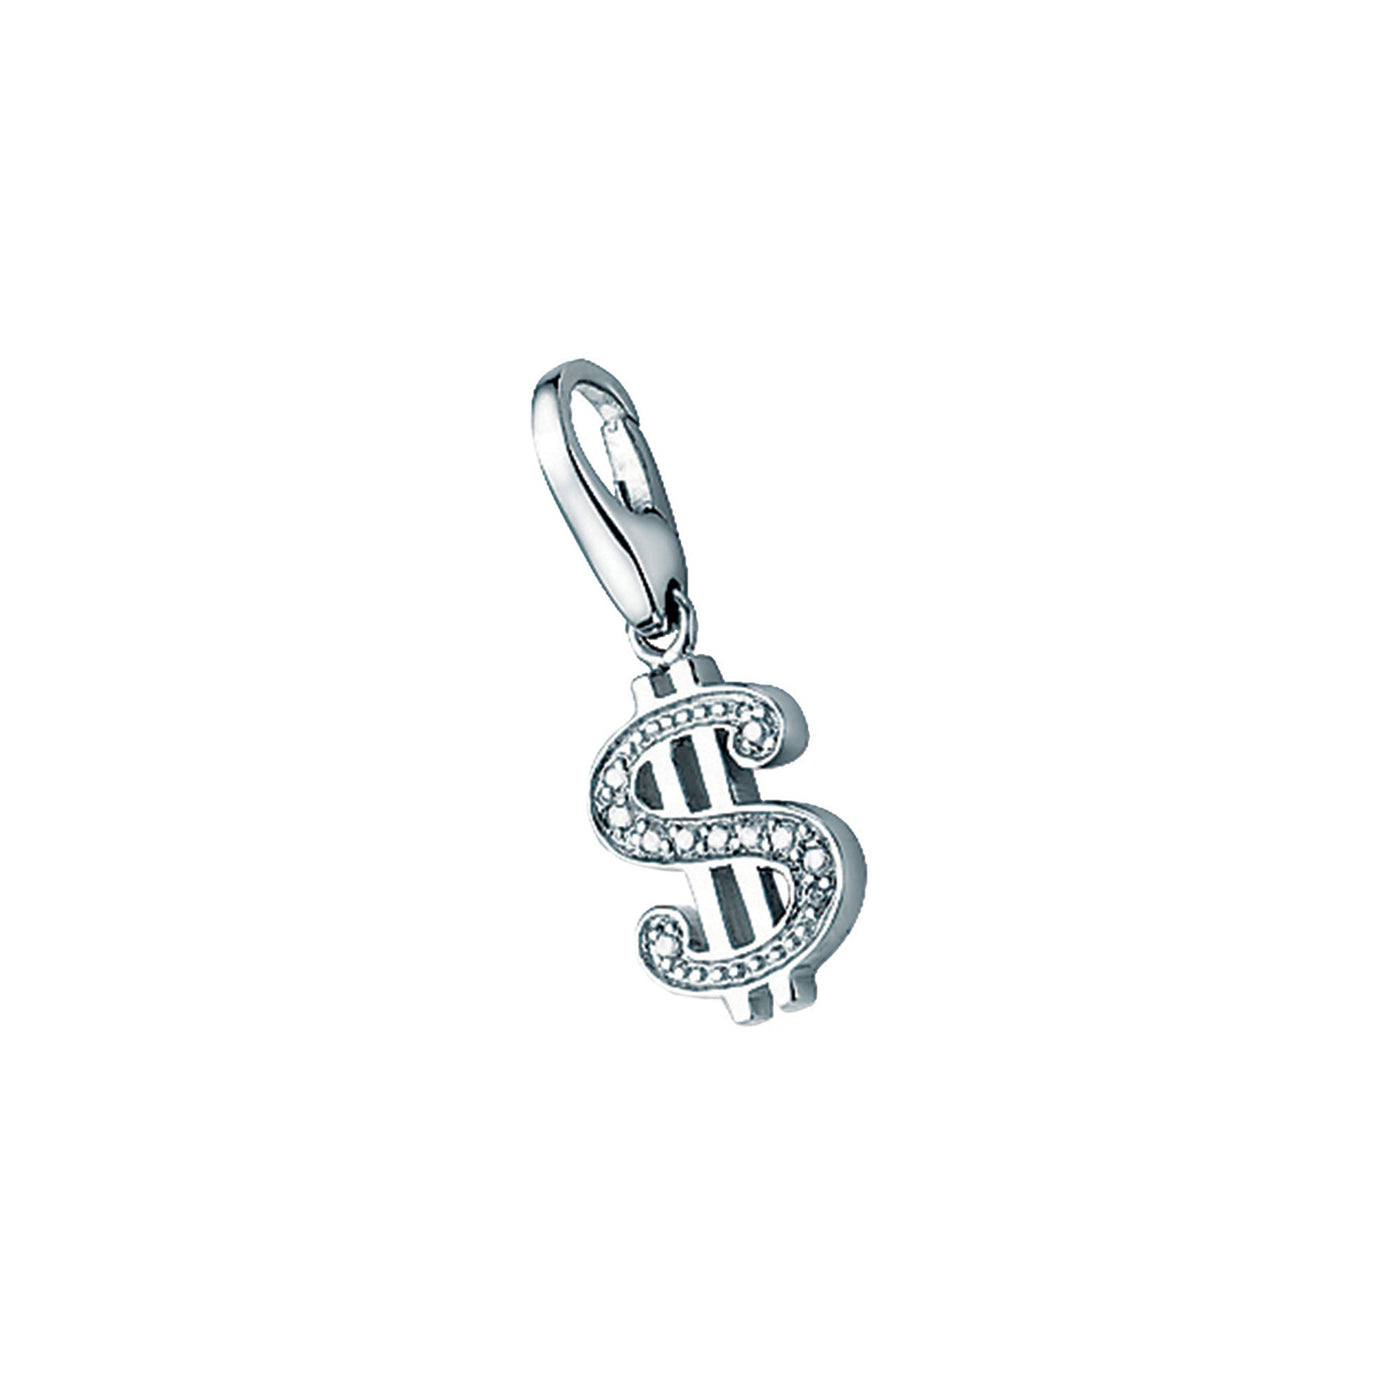 Rebecca Sloane Sterling Silver "$" With Cz Charm